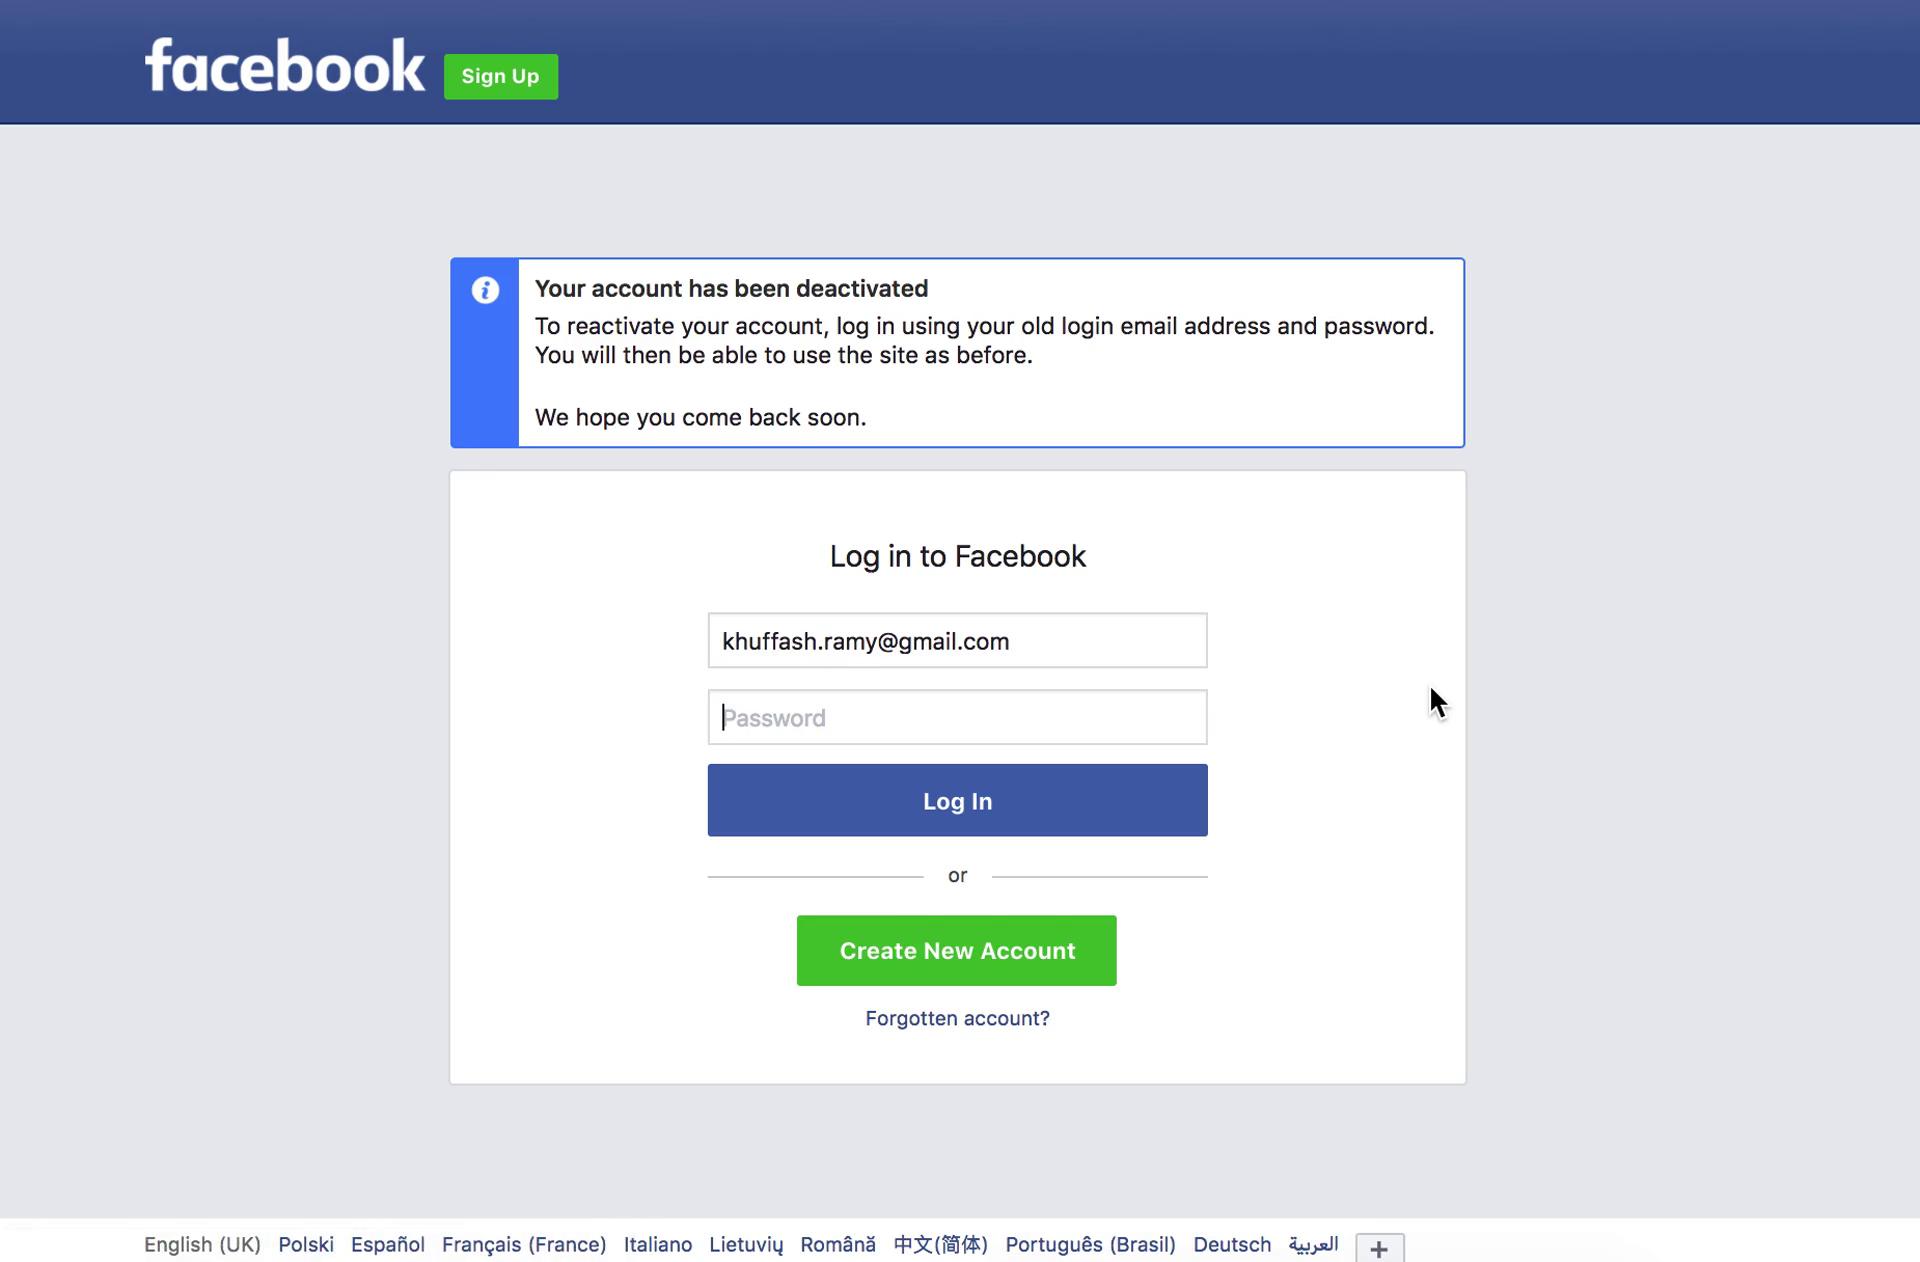 Facebook login page after account has been deactivated